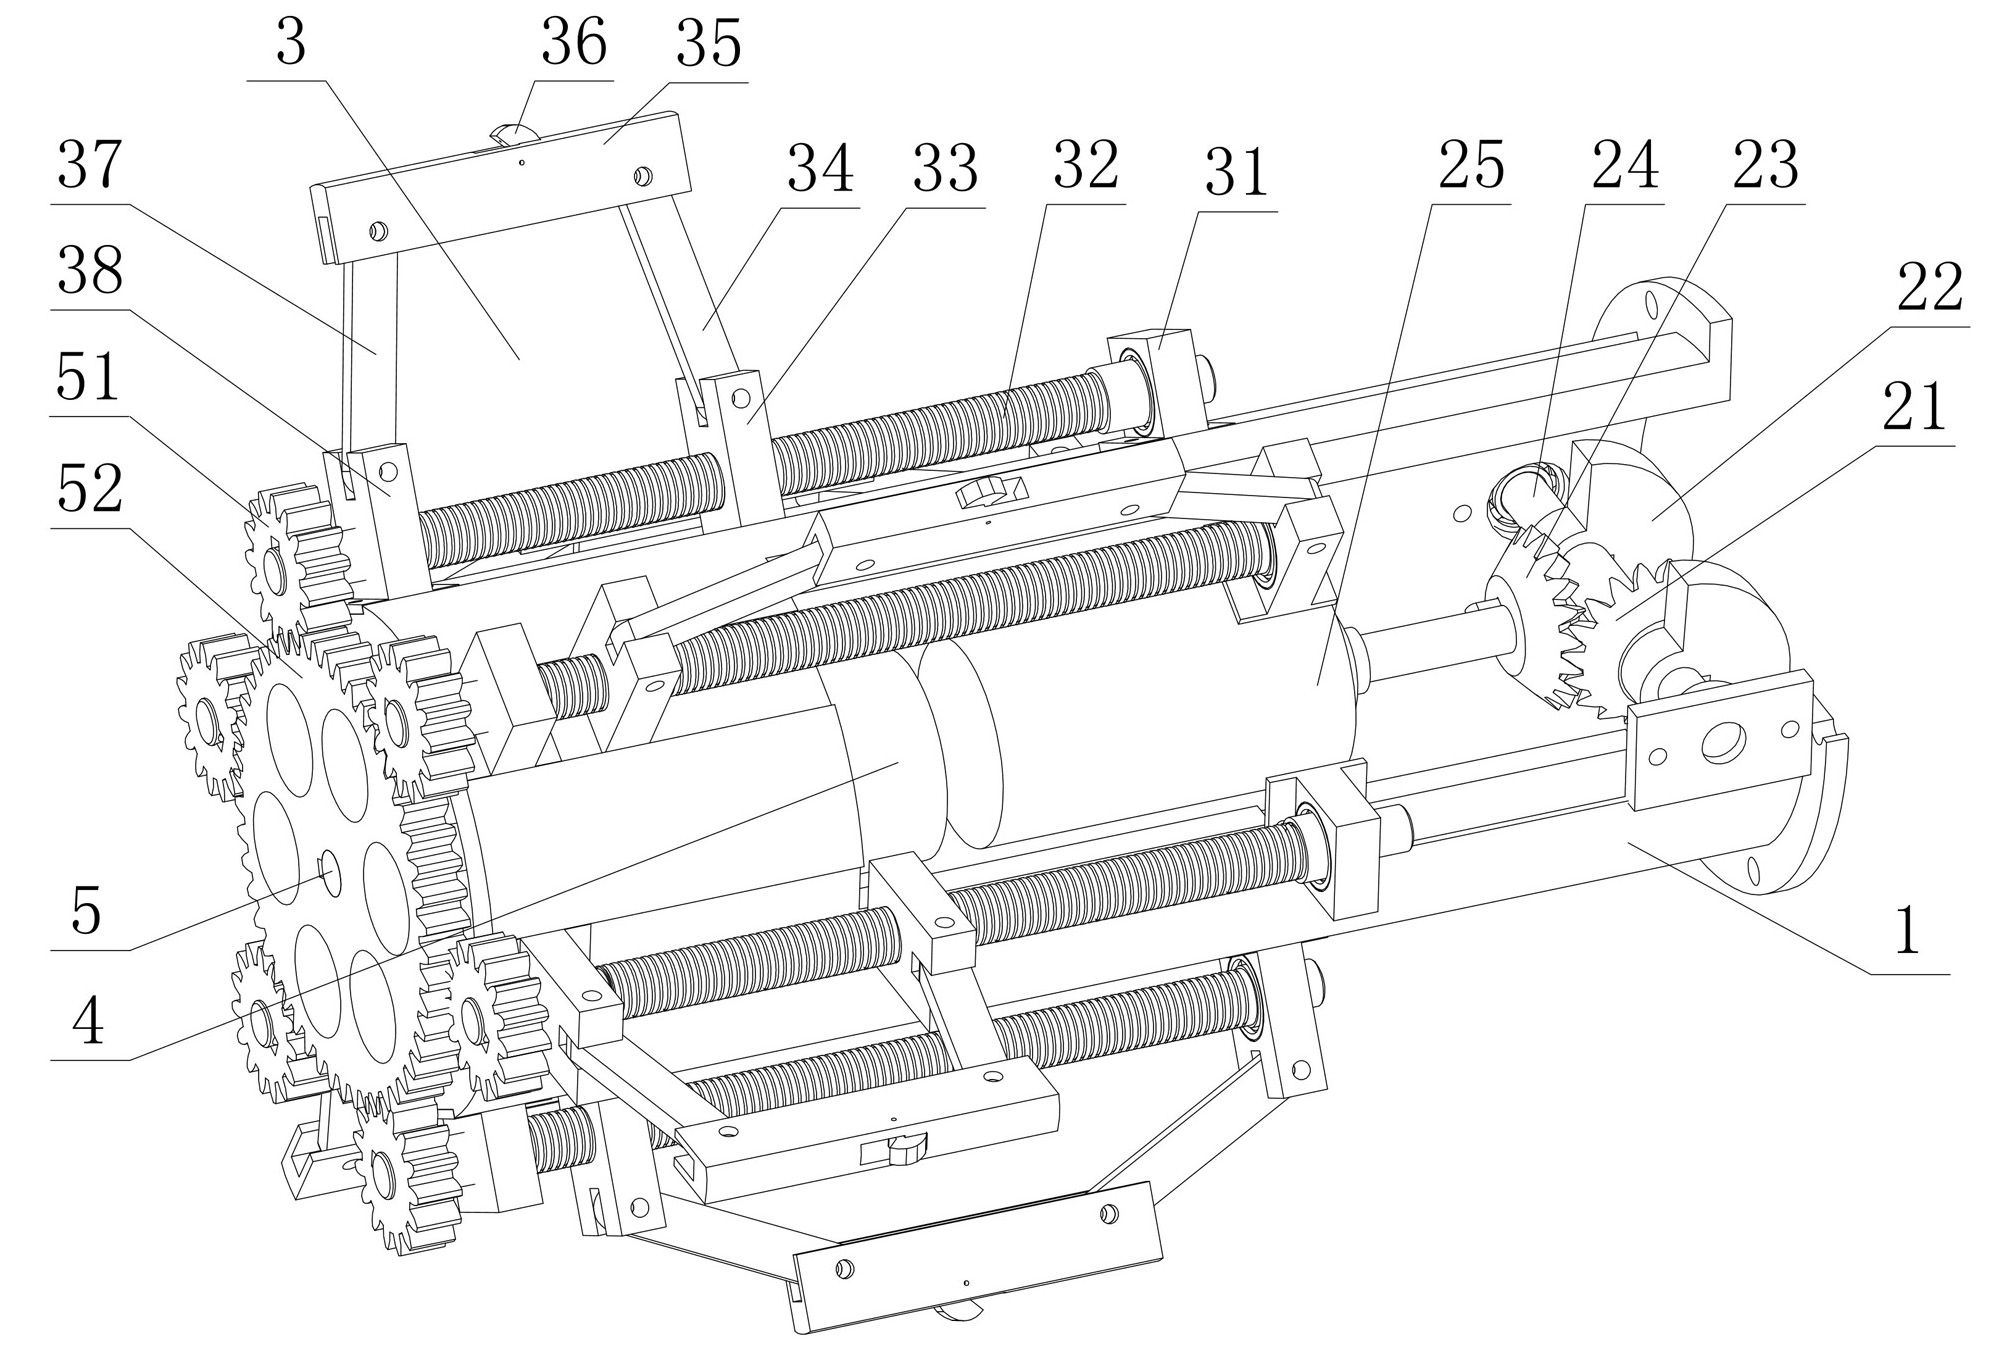 Centrifugal force drive based drawing device for equipment in pipeline